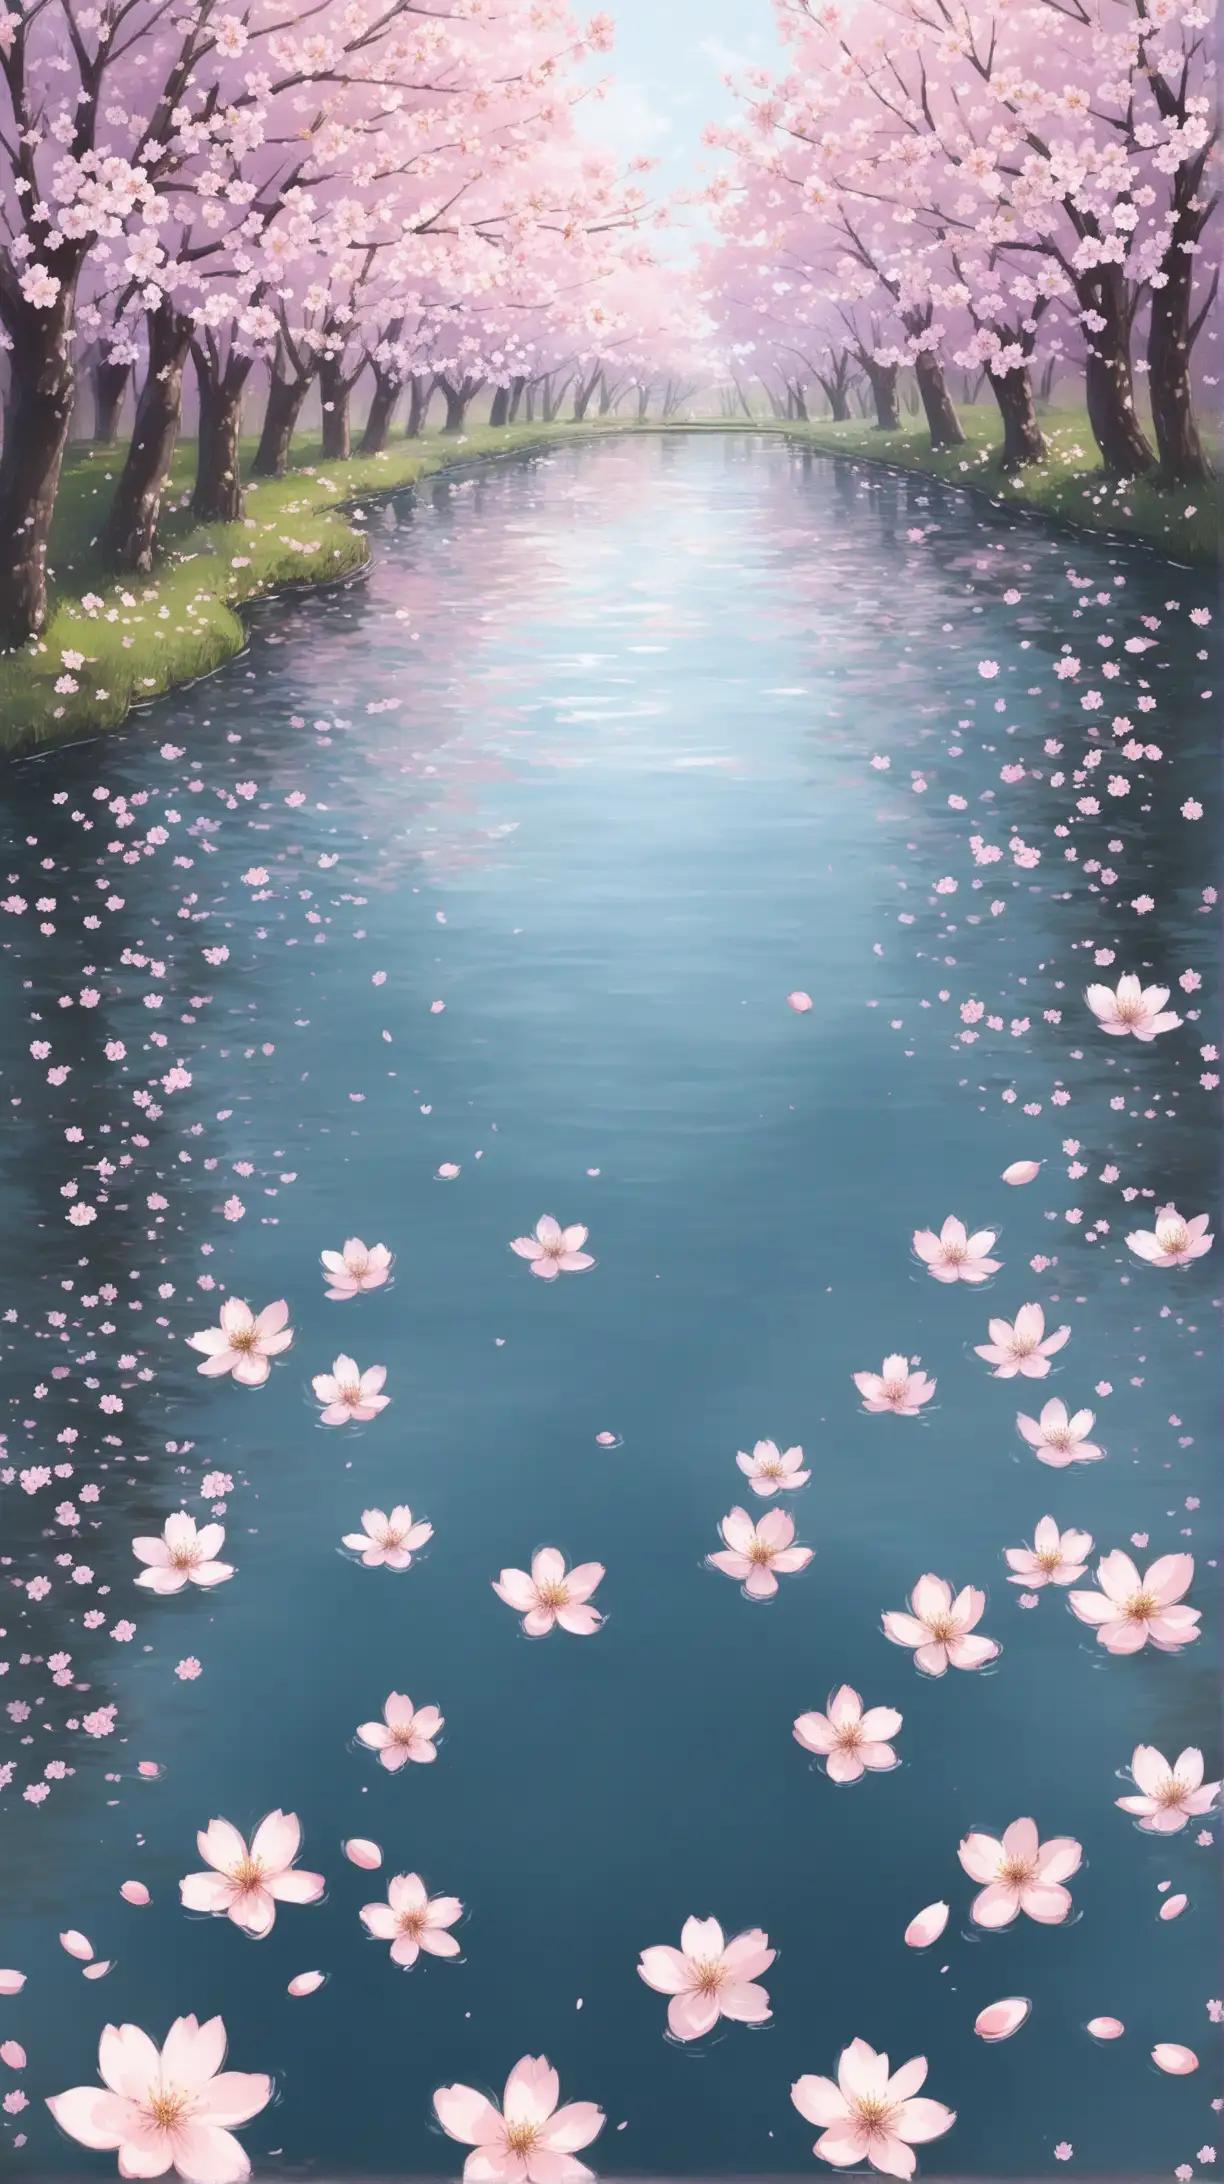 Tranquil Pond with Cherry Blossom Petals Floating